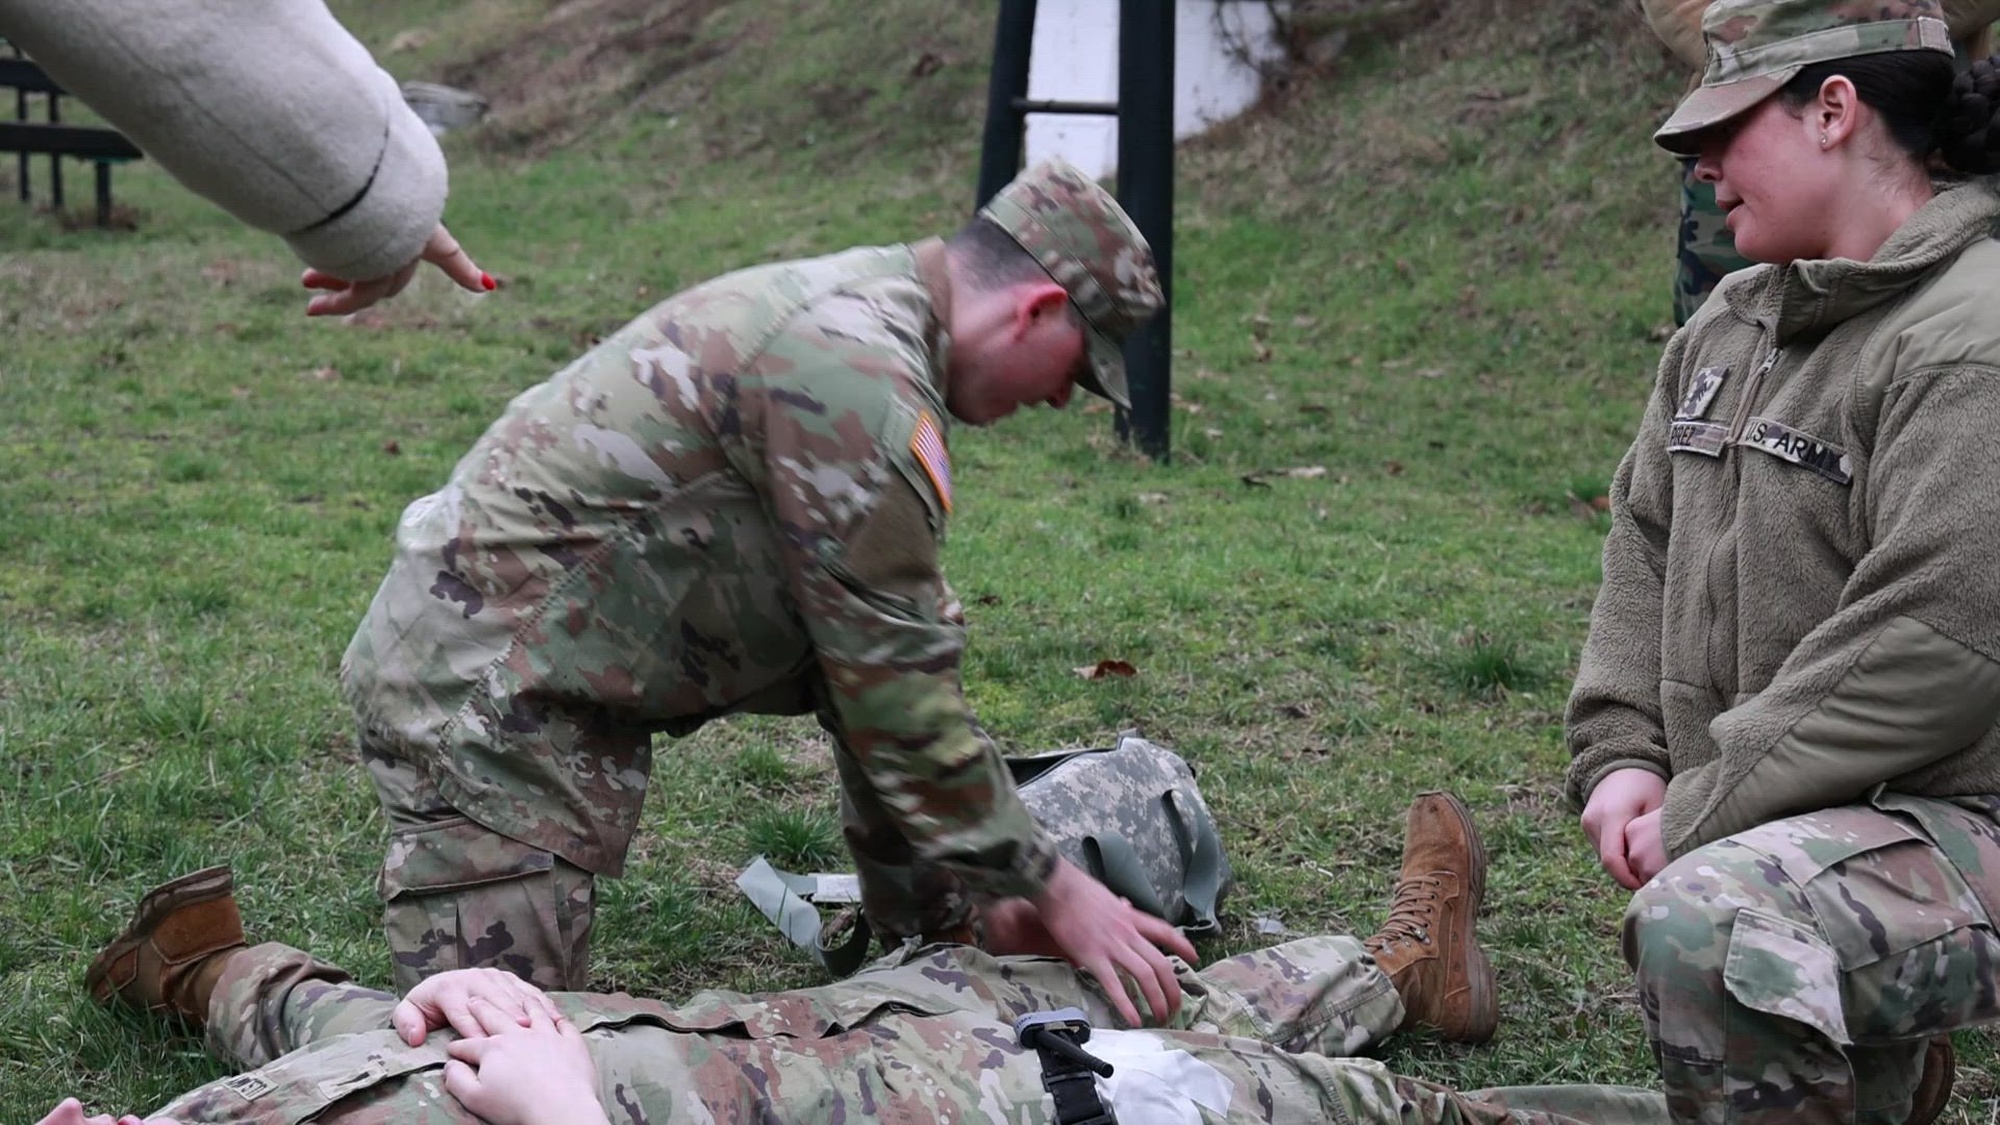 During the month of February, Soldiers from 30th Medical Brigade were tasked with traveling through Moldova, conducting tactical combat casualty care (TCCC or TC3) training with Moldovan medics. TCCC is the military guideline for trauma life support in prehospital combat medicine, designed to reduce preventable deaths while maintaining operation success. (U.S. Army video by Spc. Samuel Signor)